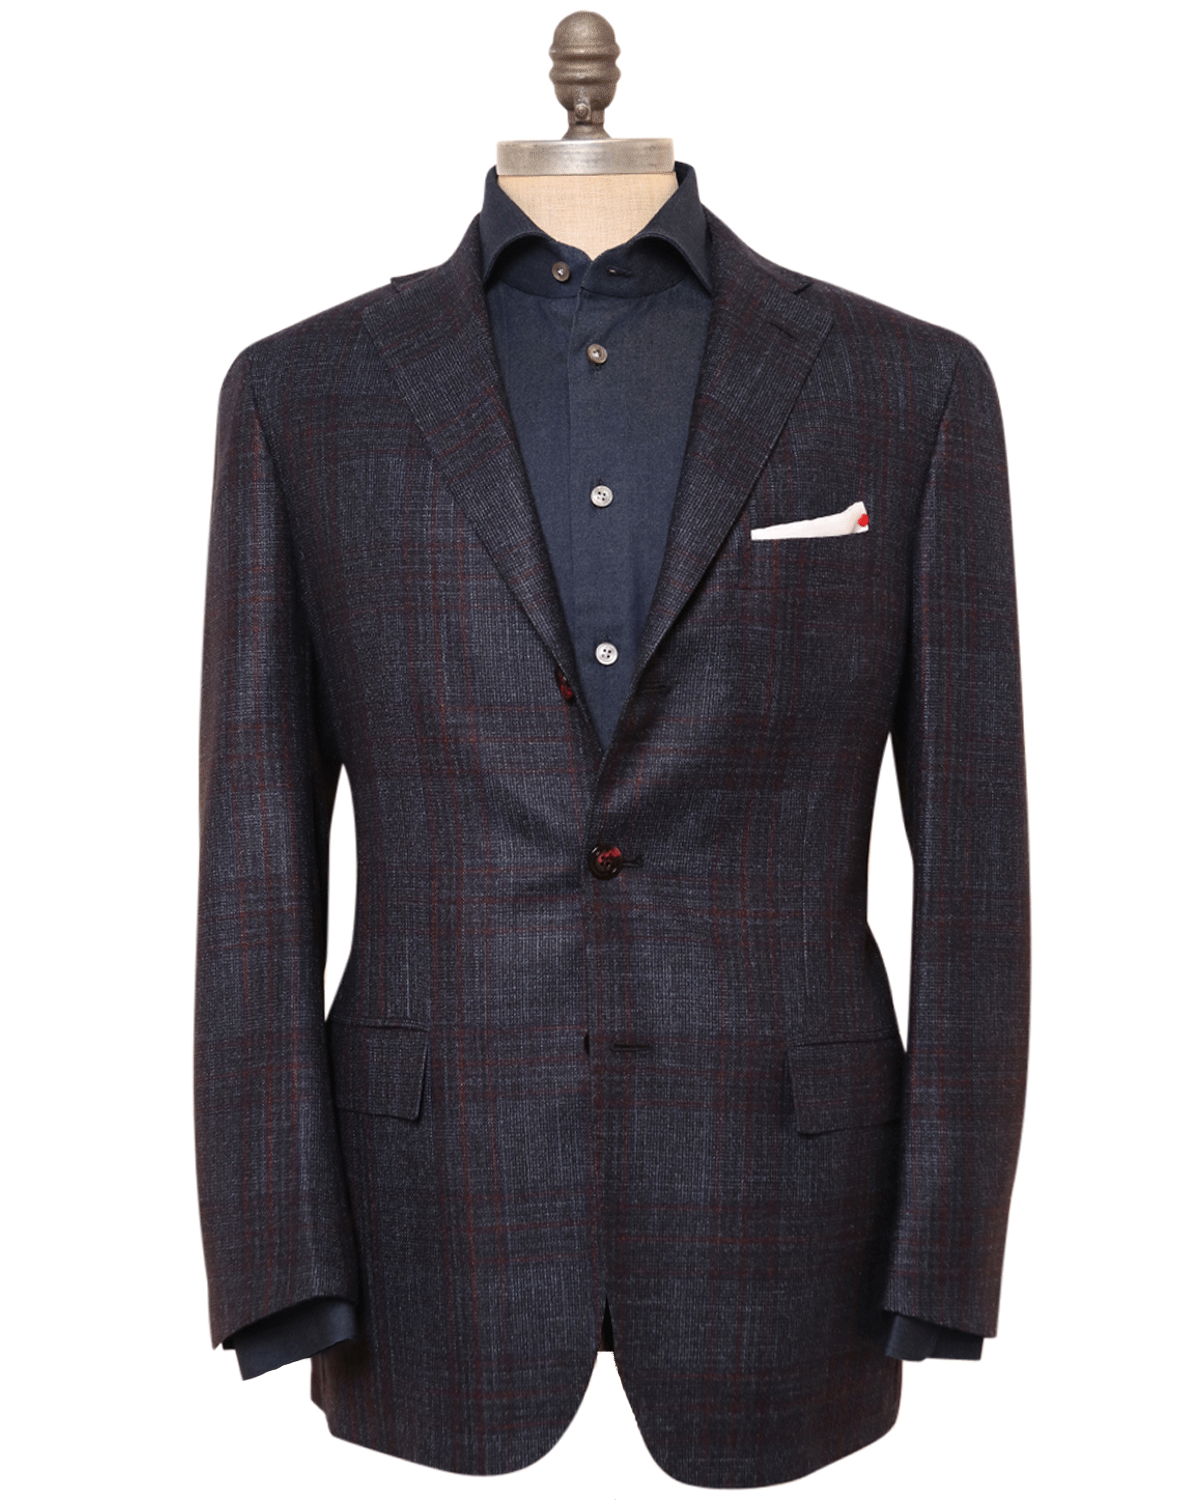 Navy and Burgandy Windowpane Wool Cashmere Blend Sportcoat